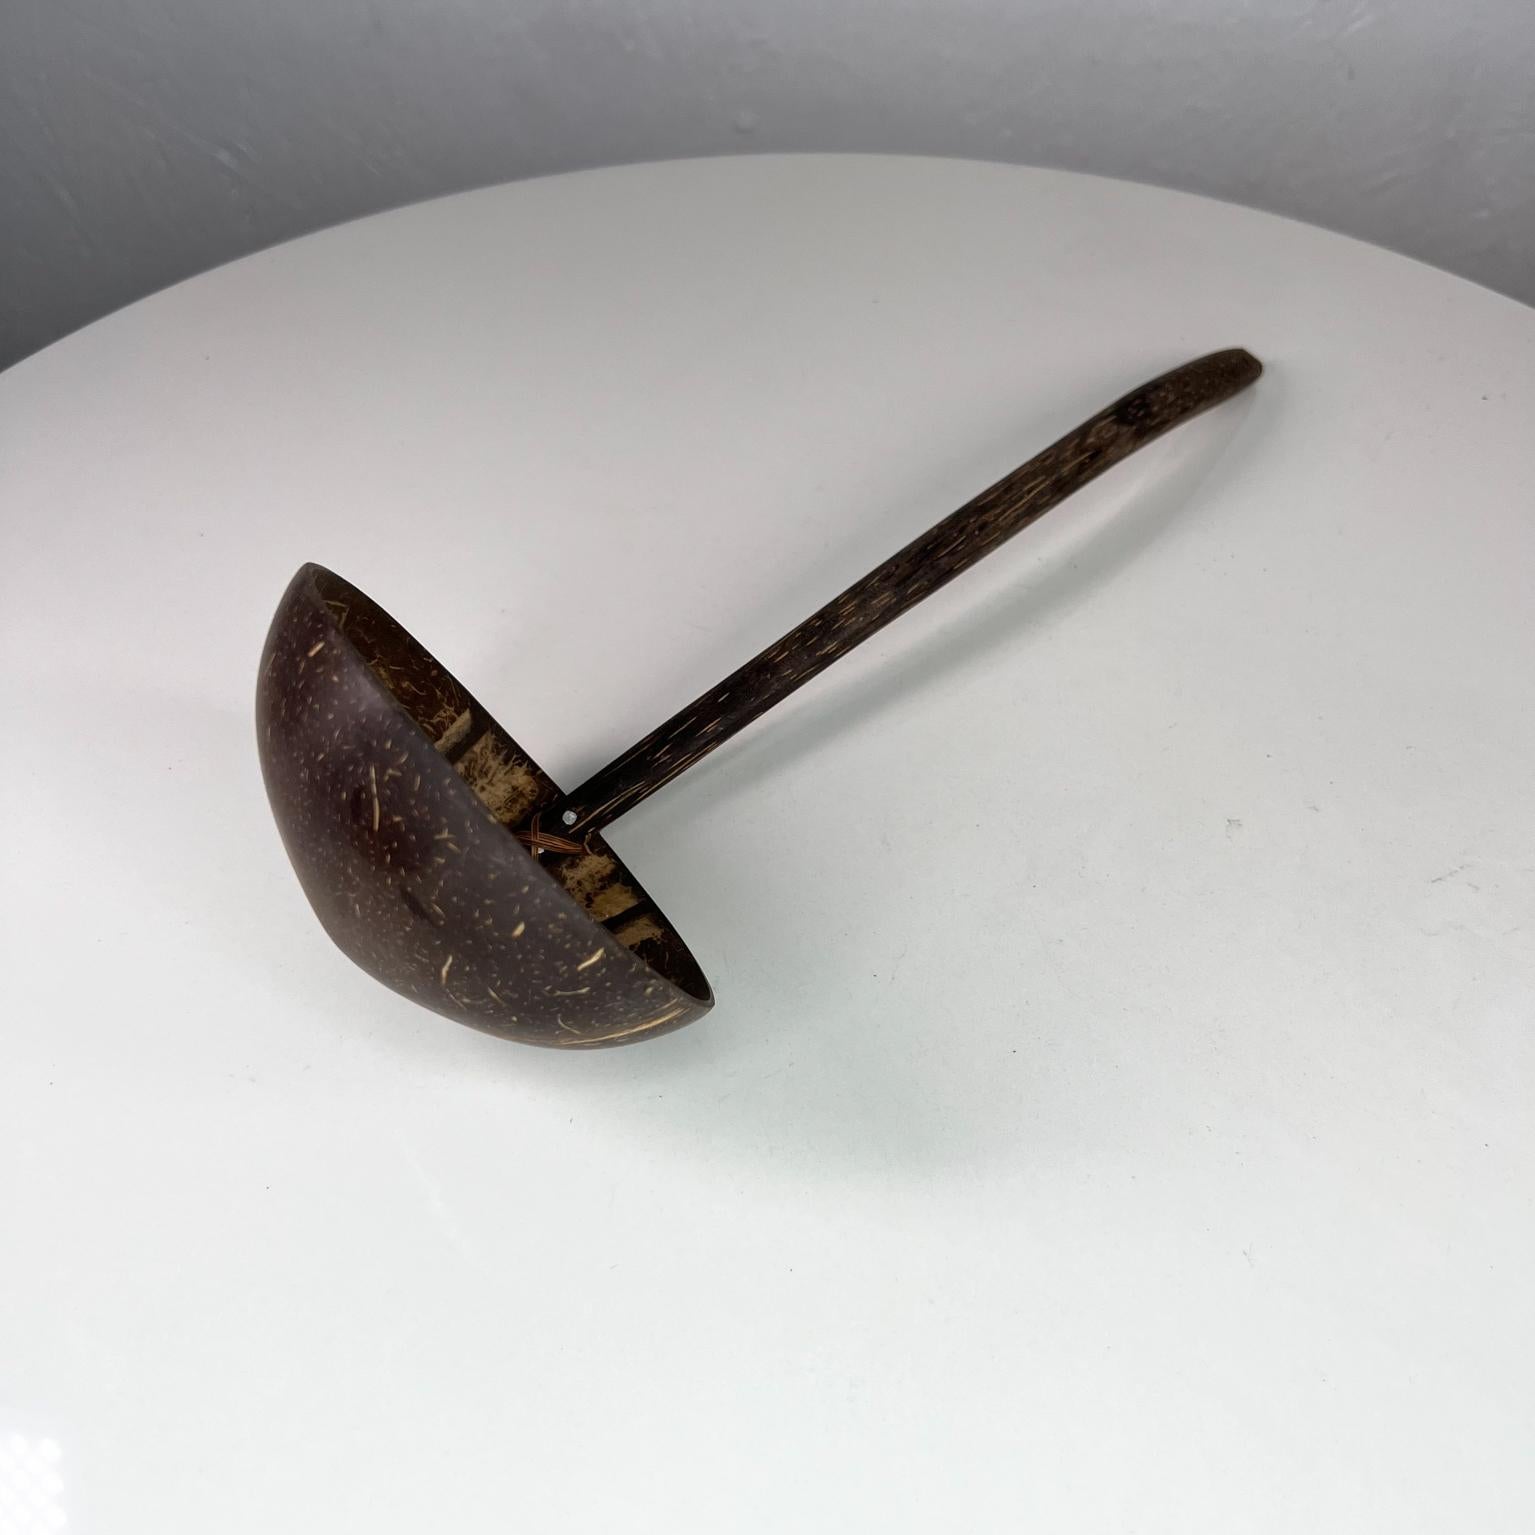 Vintage Folk Art Coconut Palm Wood Spoon Ladle
13 long x 4.38 w x 4.38 d
Preowned vintage unrestored condition.
See images provided